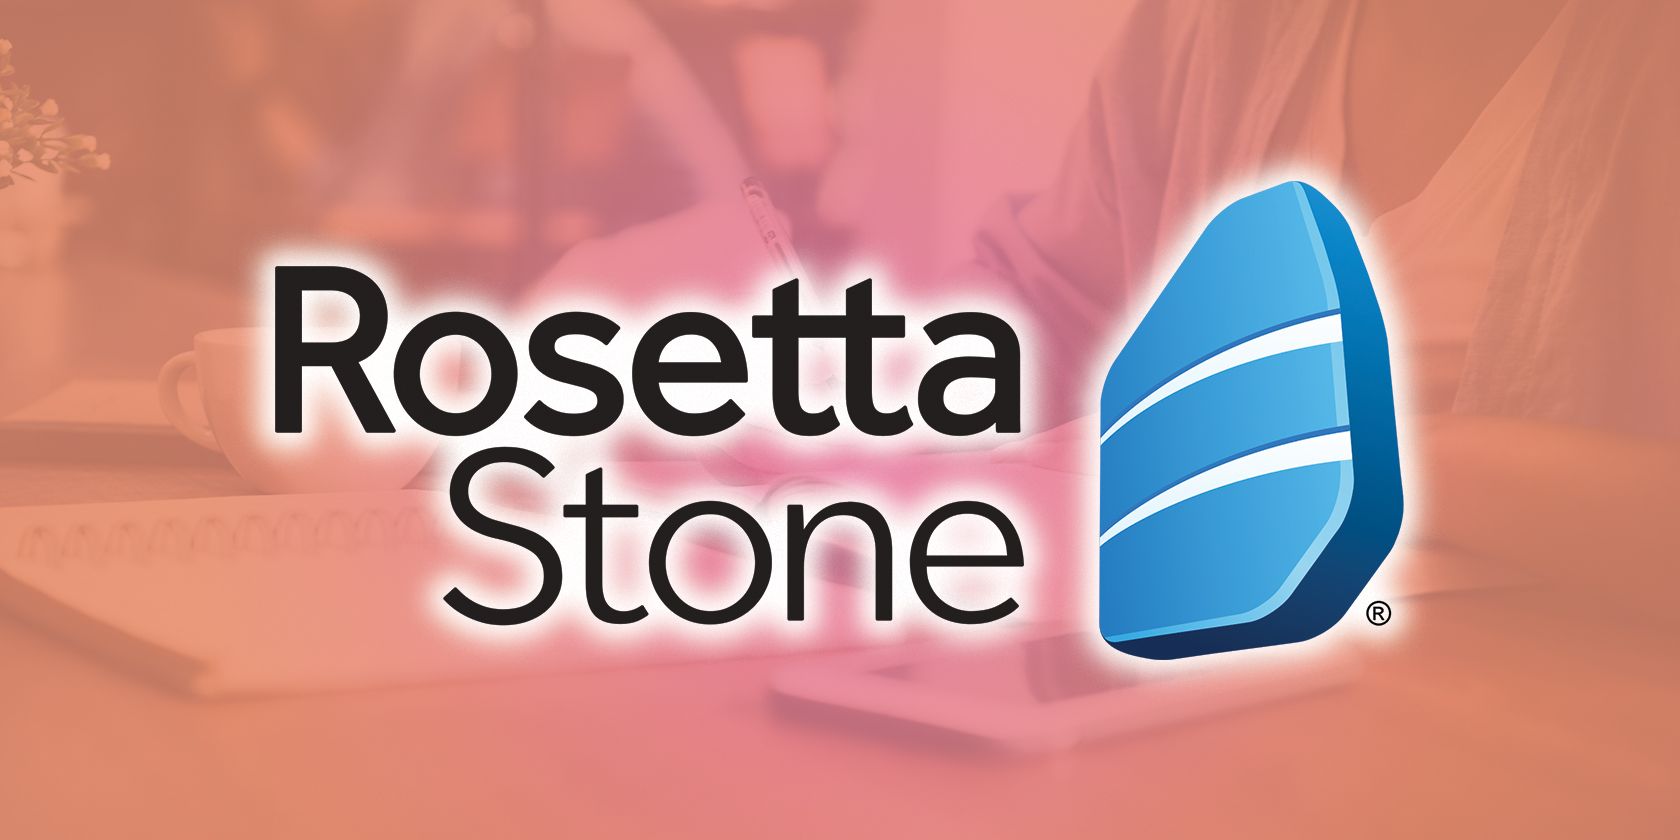 how to install rosetta stone in polish to learn english